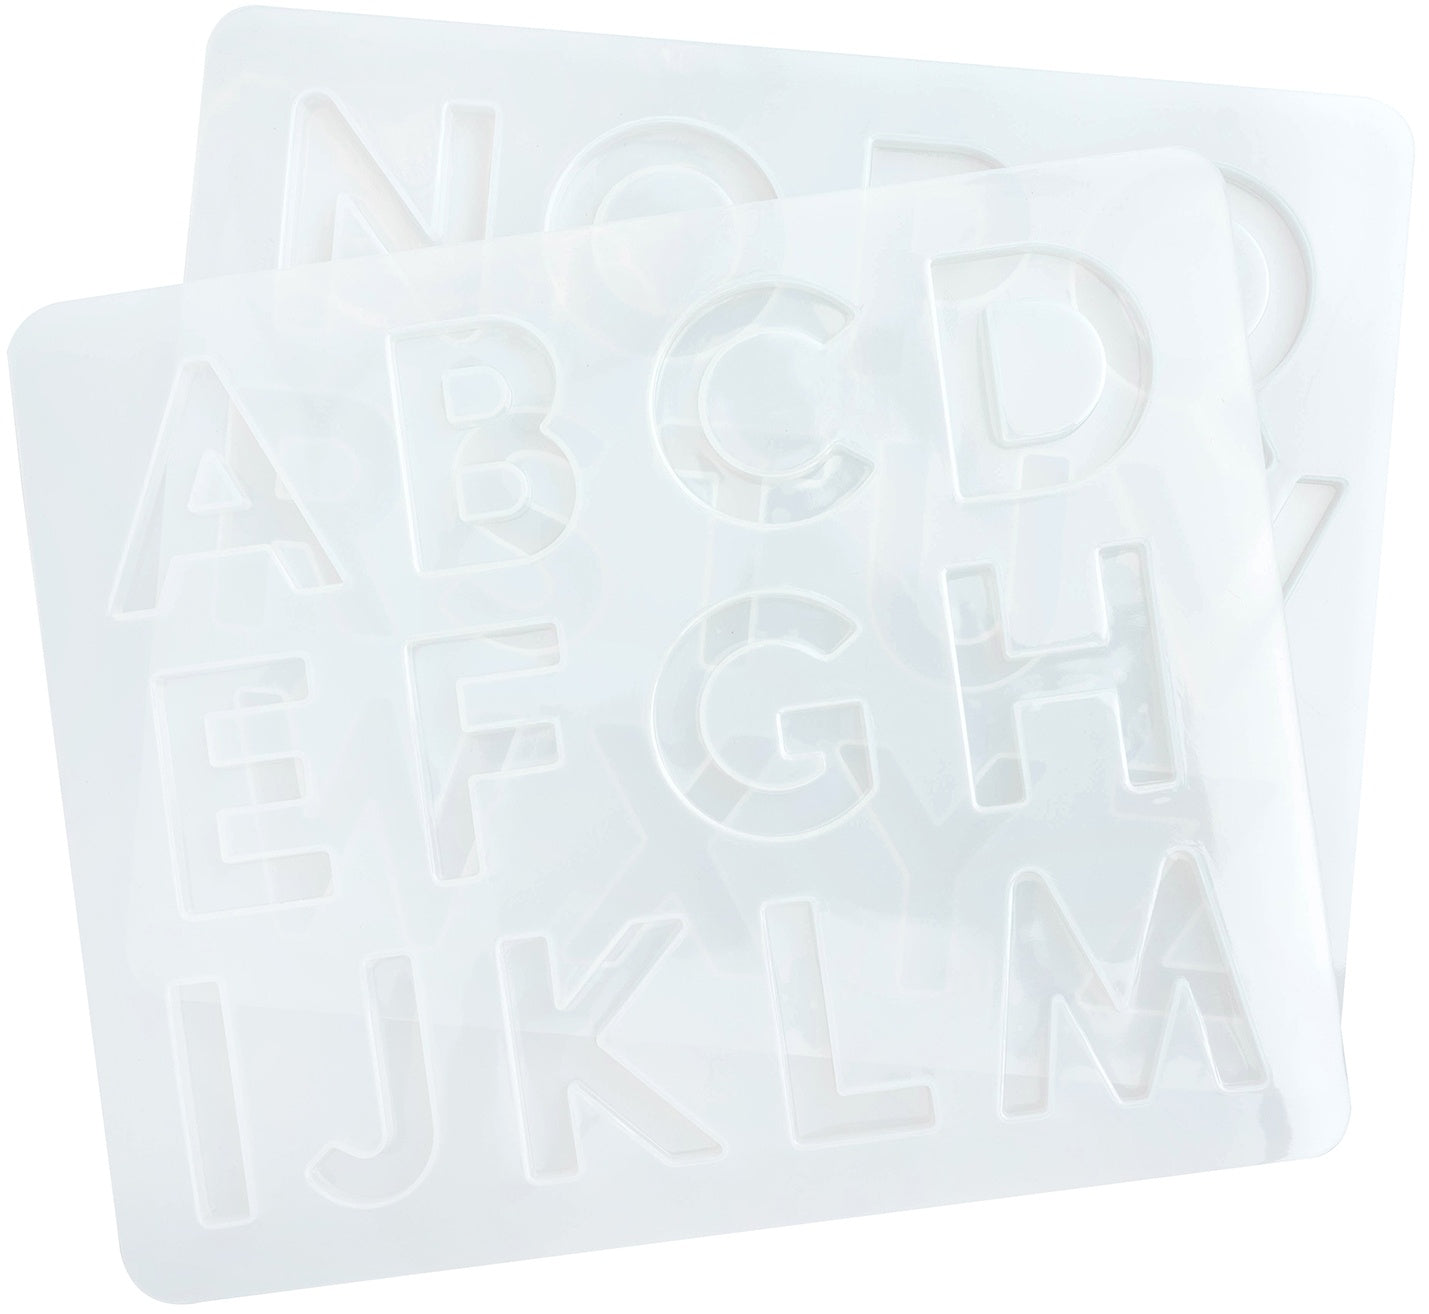 American Crafts Color Pour Resin Mold -Alphabet